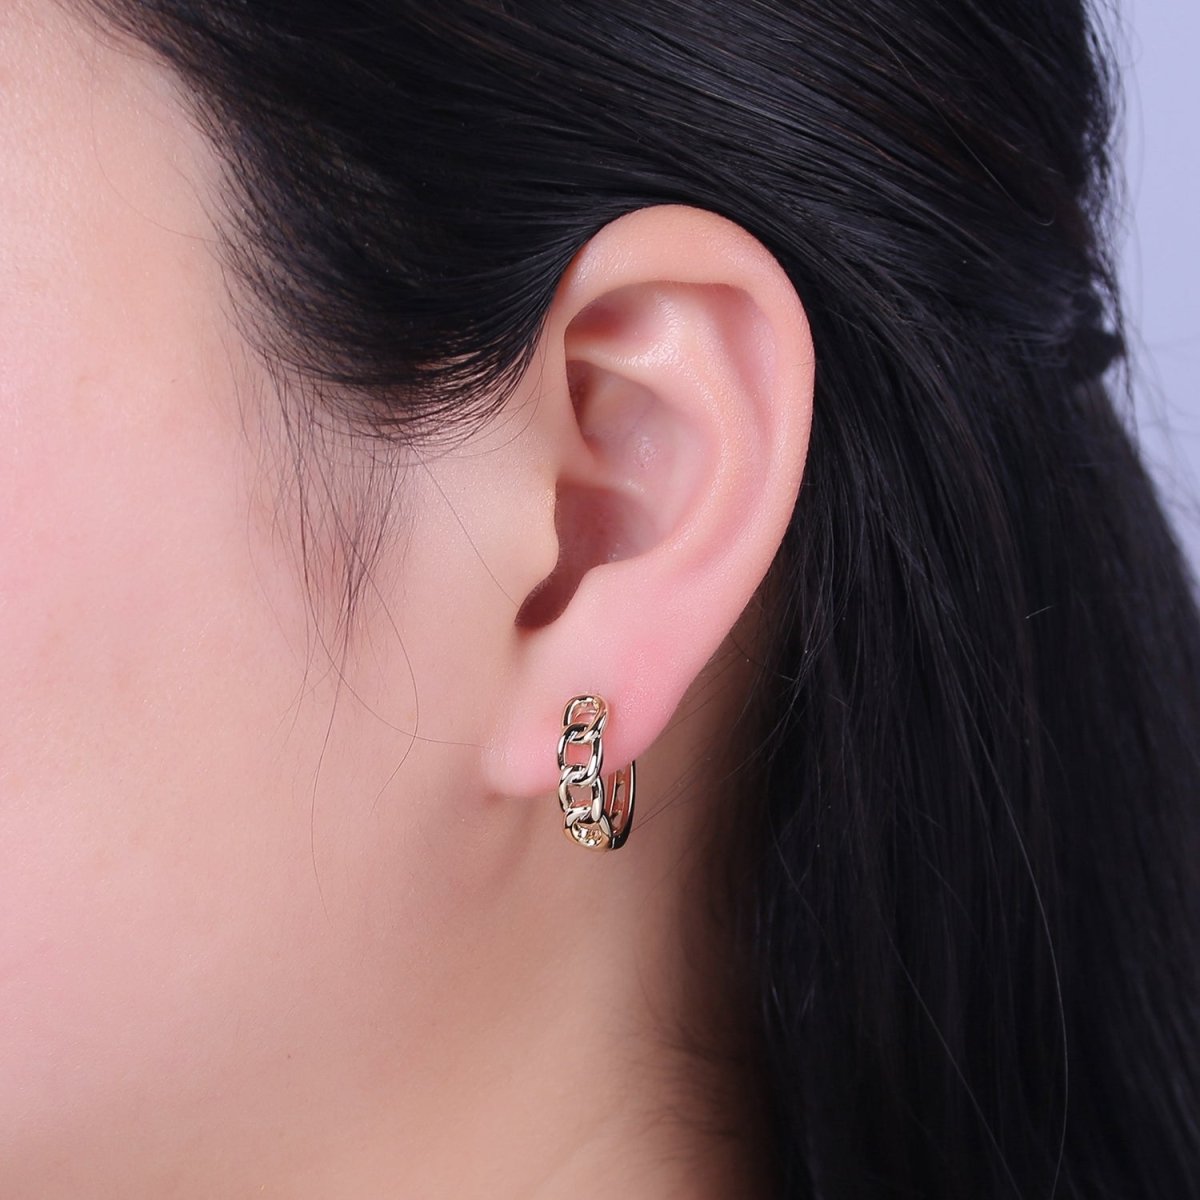 Medium Curb Chain Link Hoop Earring in 14k Gold Filled Jewelry Everyday Earring V-151 - DLUXCA